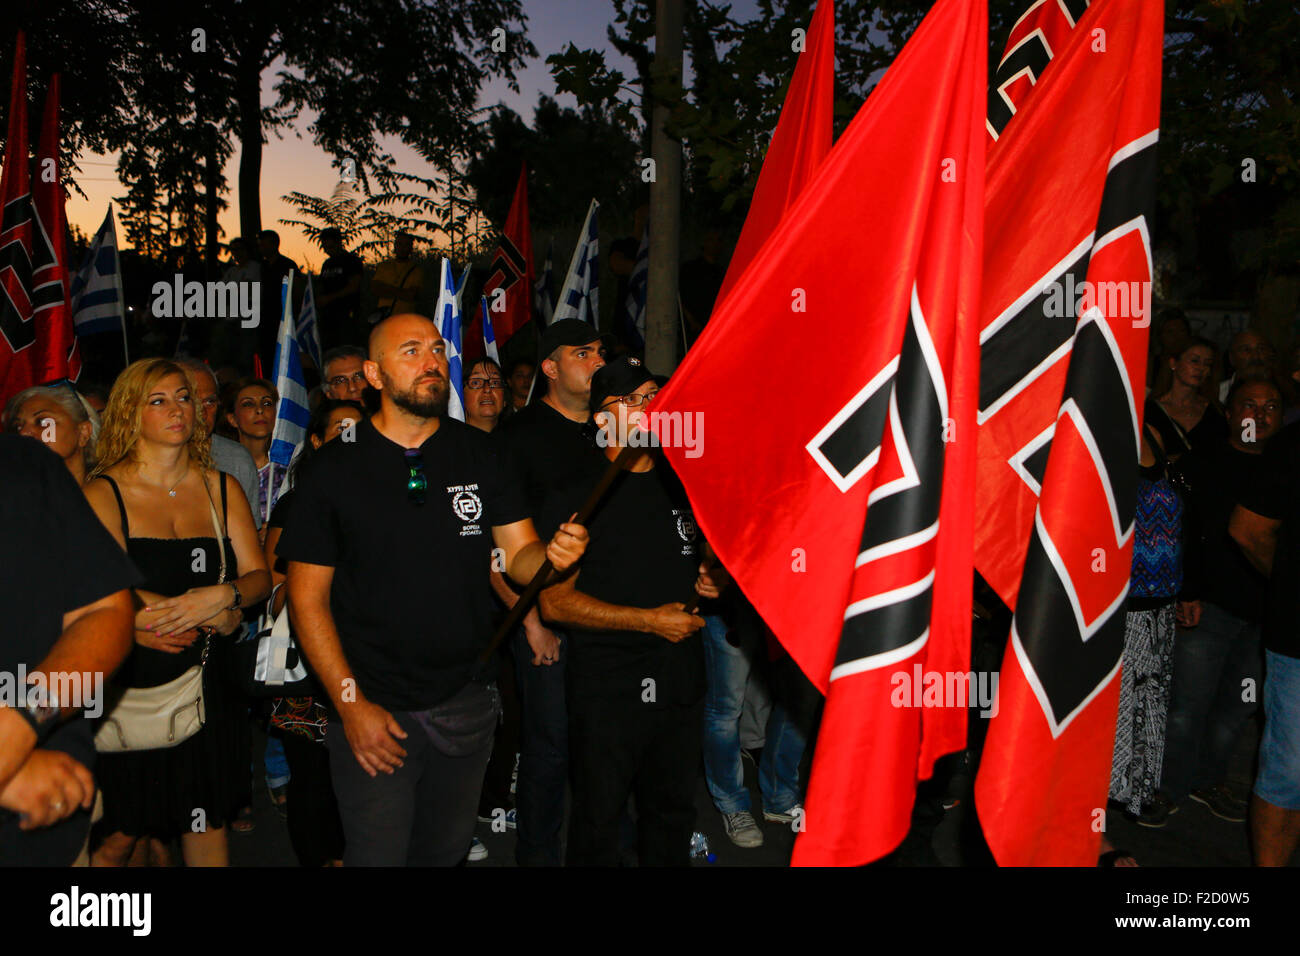 Athens, Greece. 16th September 2015. Golden Dawn supporter carry Golden Dawn flags the election rally in Athens. Greek right wing  party Golden Dawn held an election rally in Athens, four days ahead of election day. The party hopes to gain enough seats in the election to become the third latest party in the Greek Parliament. Credit:  Michael Debets/Alamy Live News Stock Photo